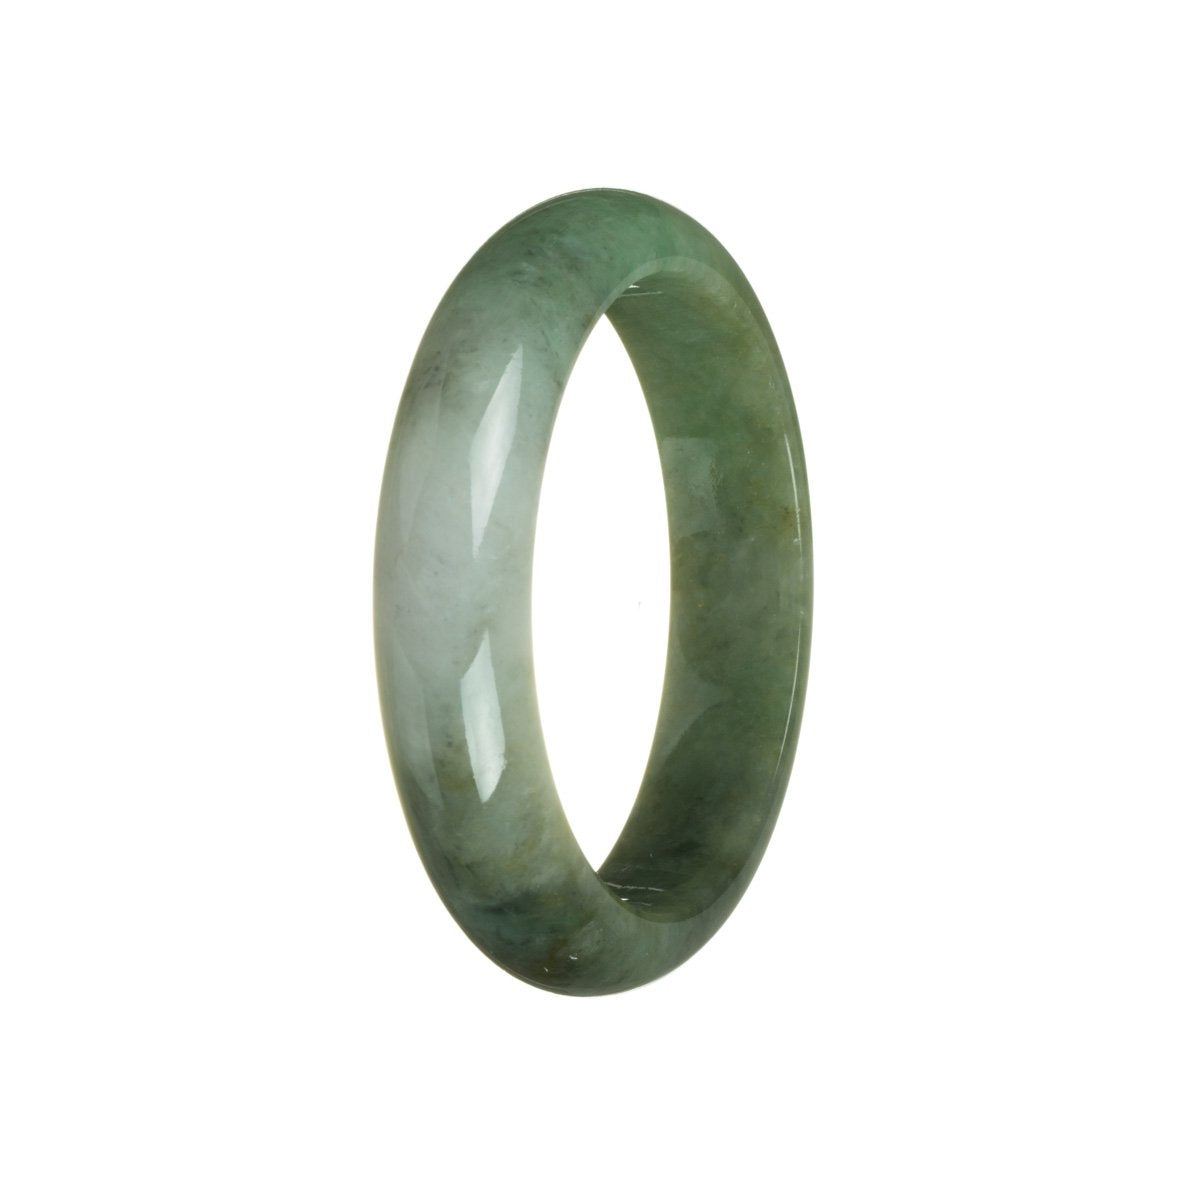 A close-up photograph of a green and white jade bracelet in the shape of a half moon. The jade stones are untreated and have a natural, authentic appearance. The bracelet has a width of 60mm.